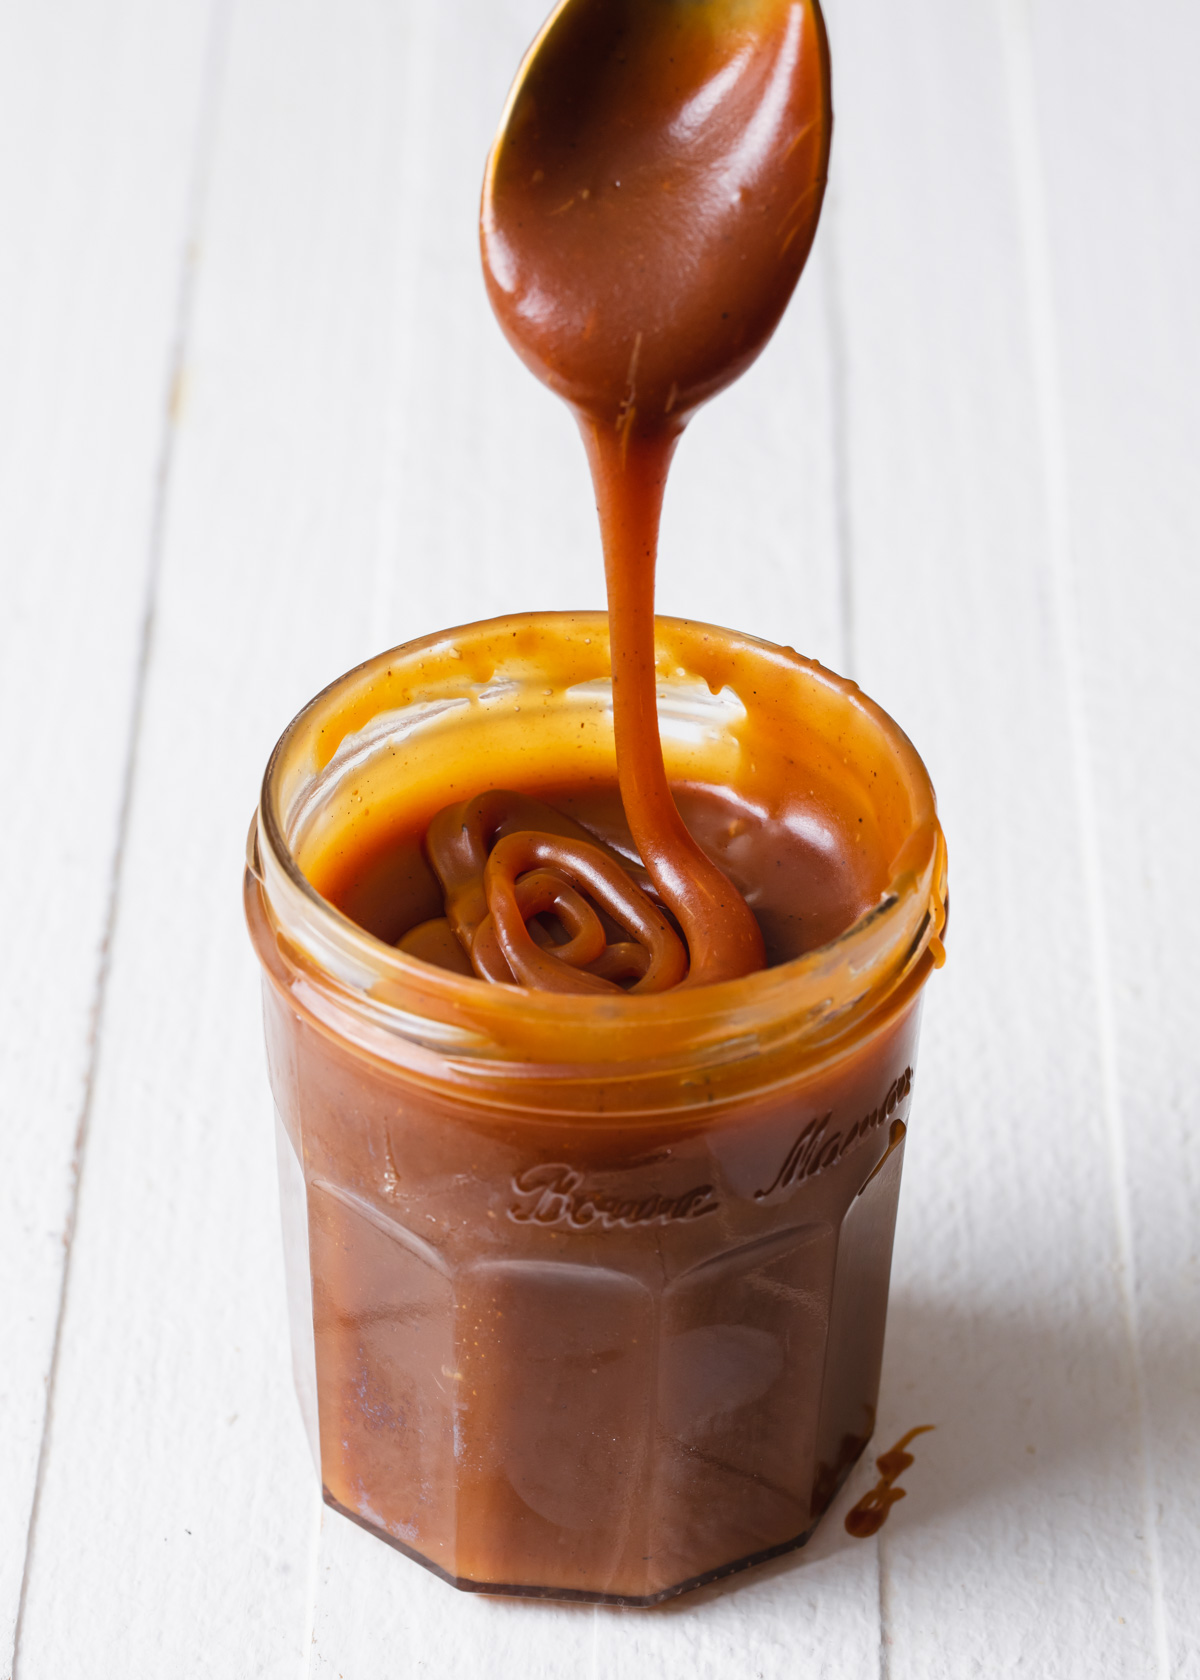 A jar of homemade salted caramel sauce dripping from a spoon